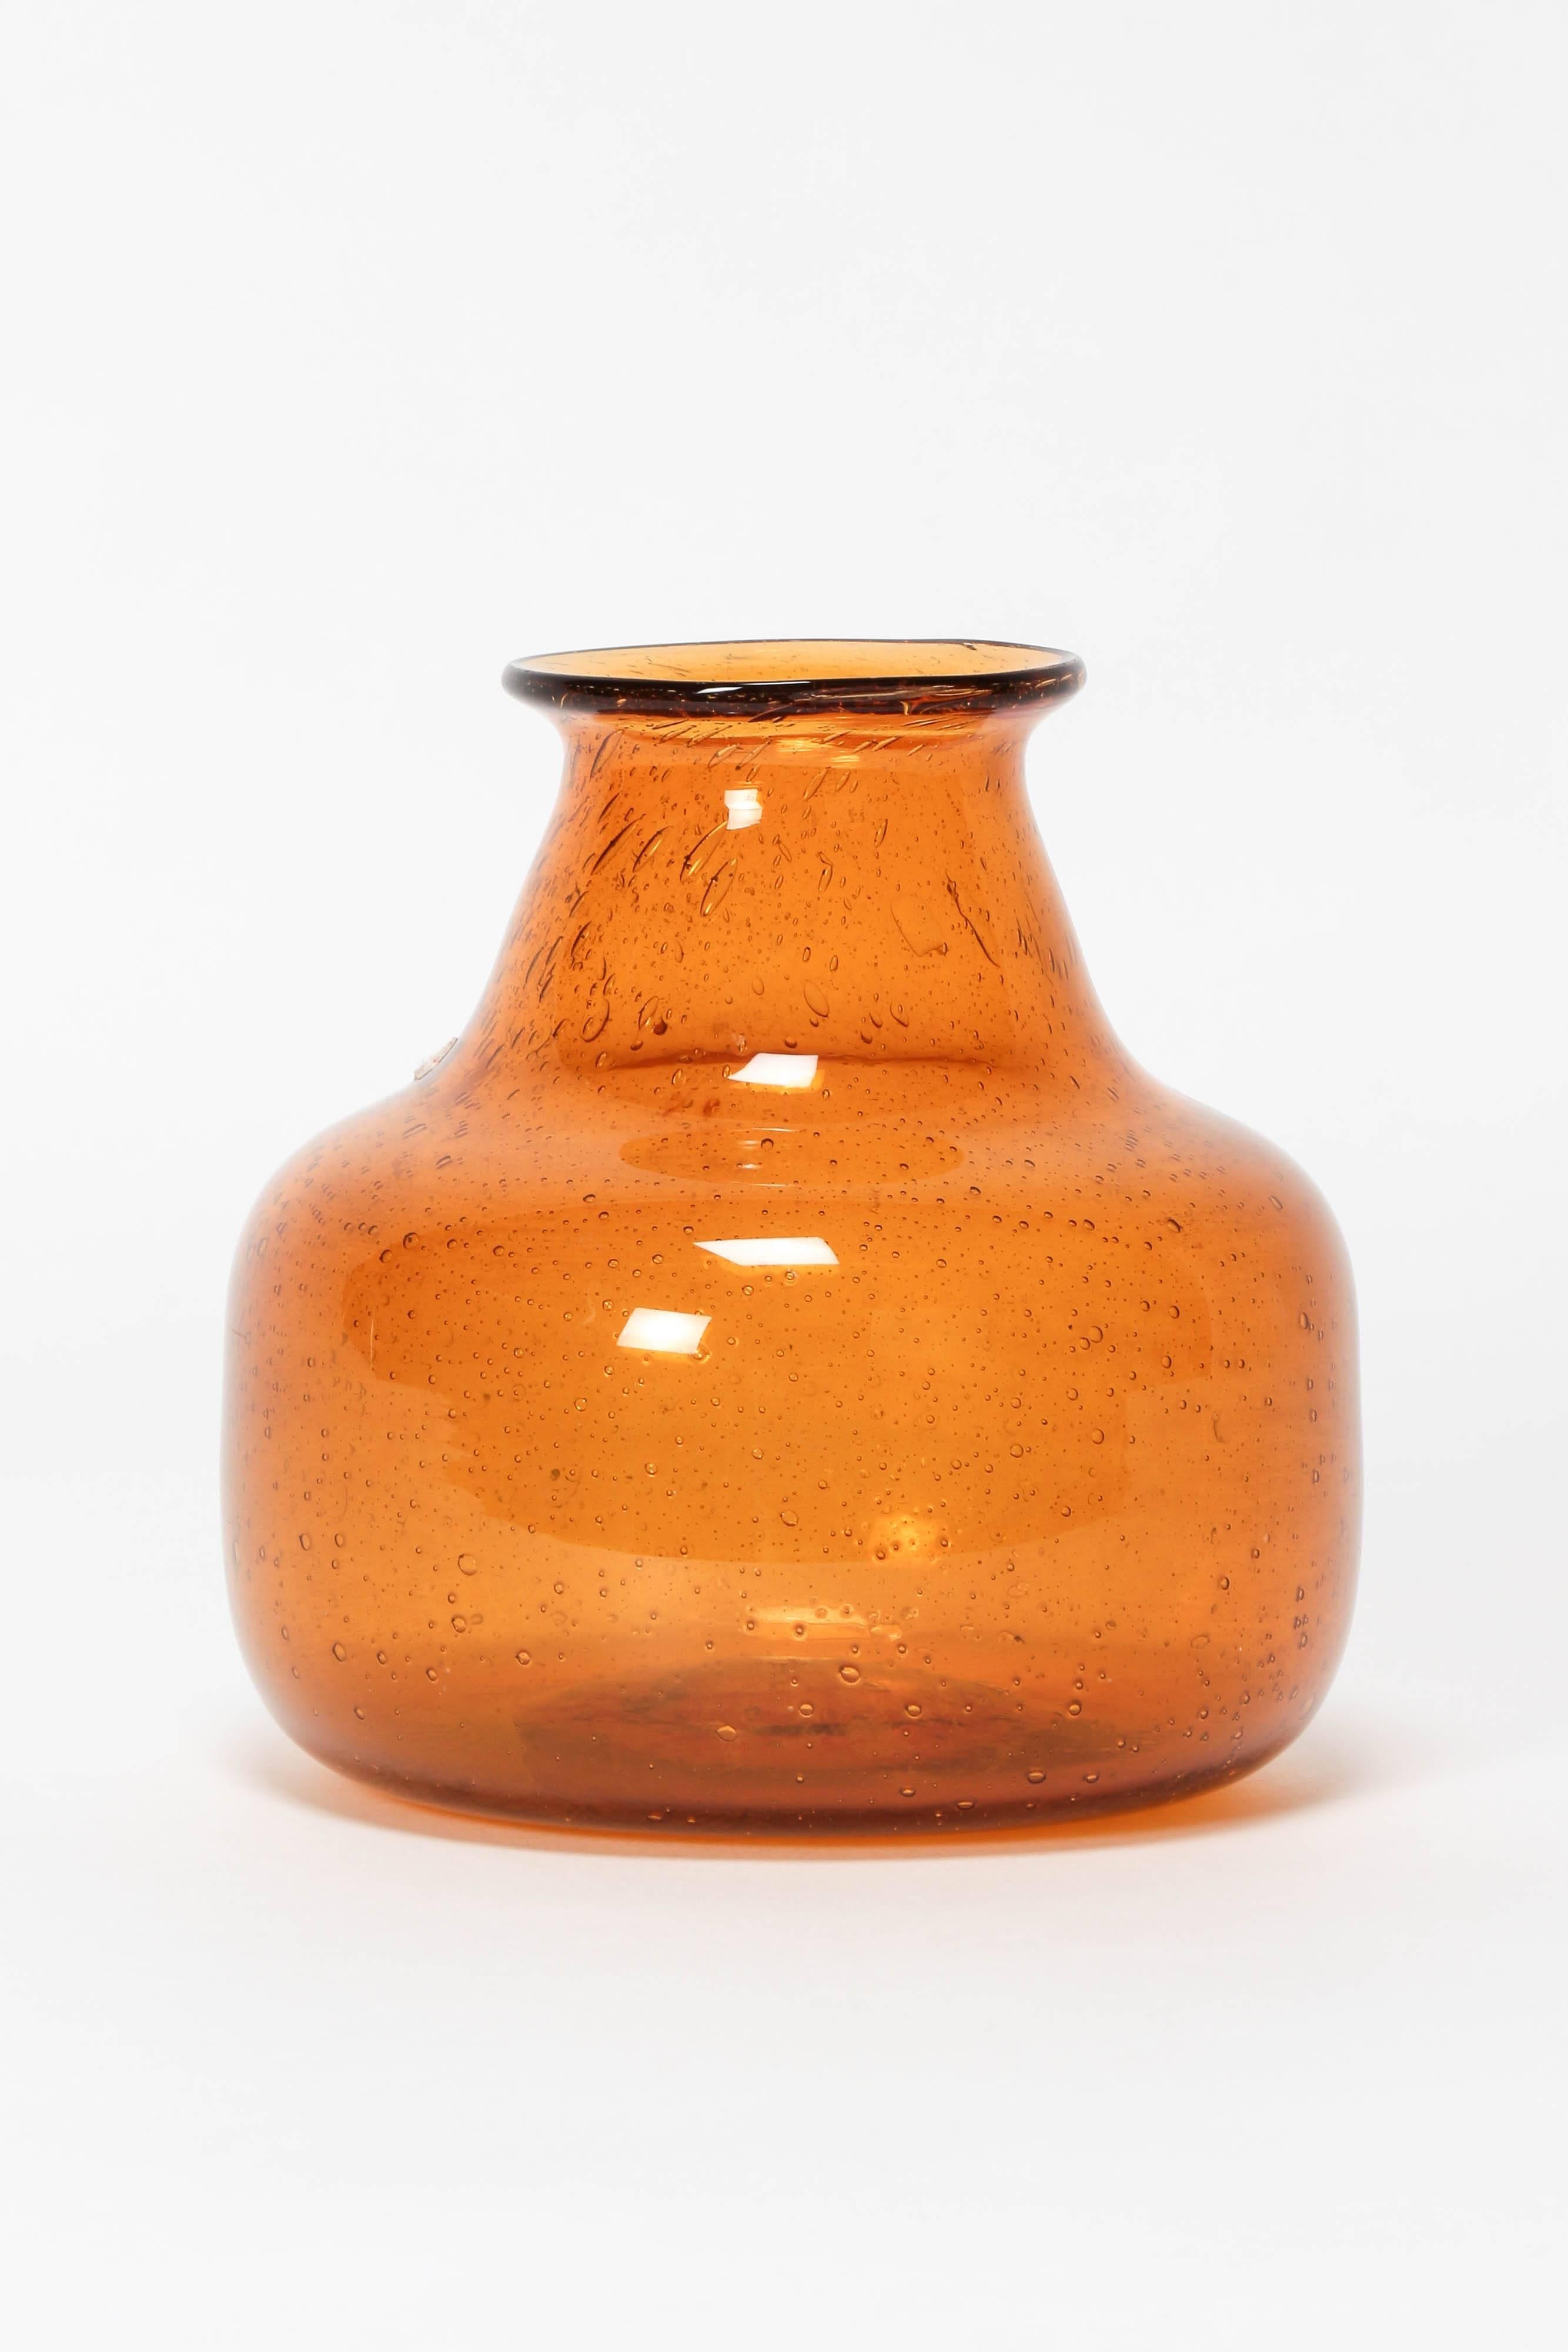 Erik Höglund vase Amber manufactured by Boda in Sweden in the 1960s. Beautiful handblown glass with air inclusions. Comes with tag of the manufacturer and the designer.